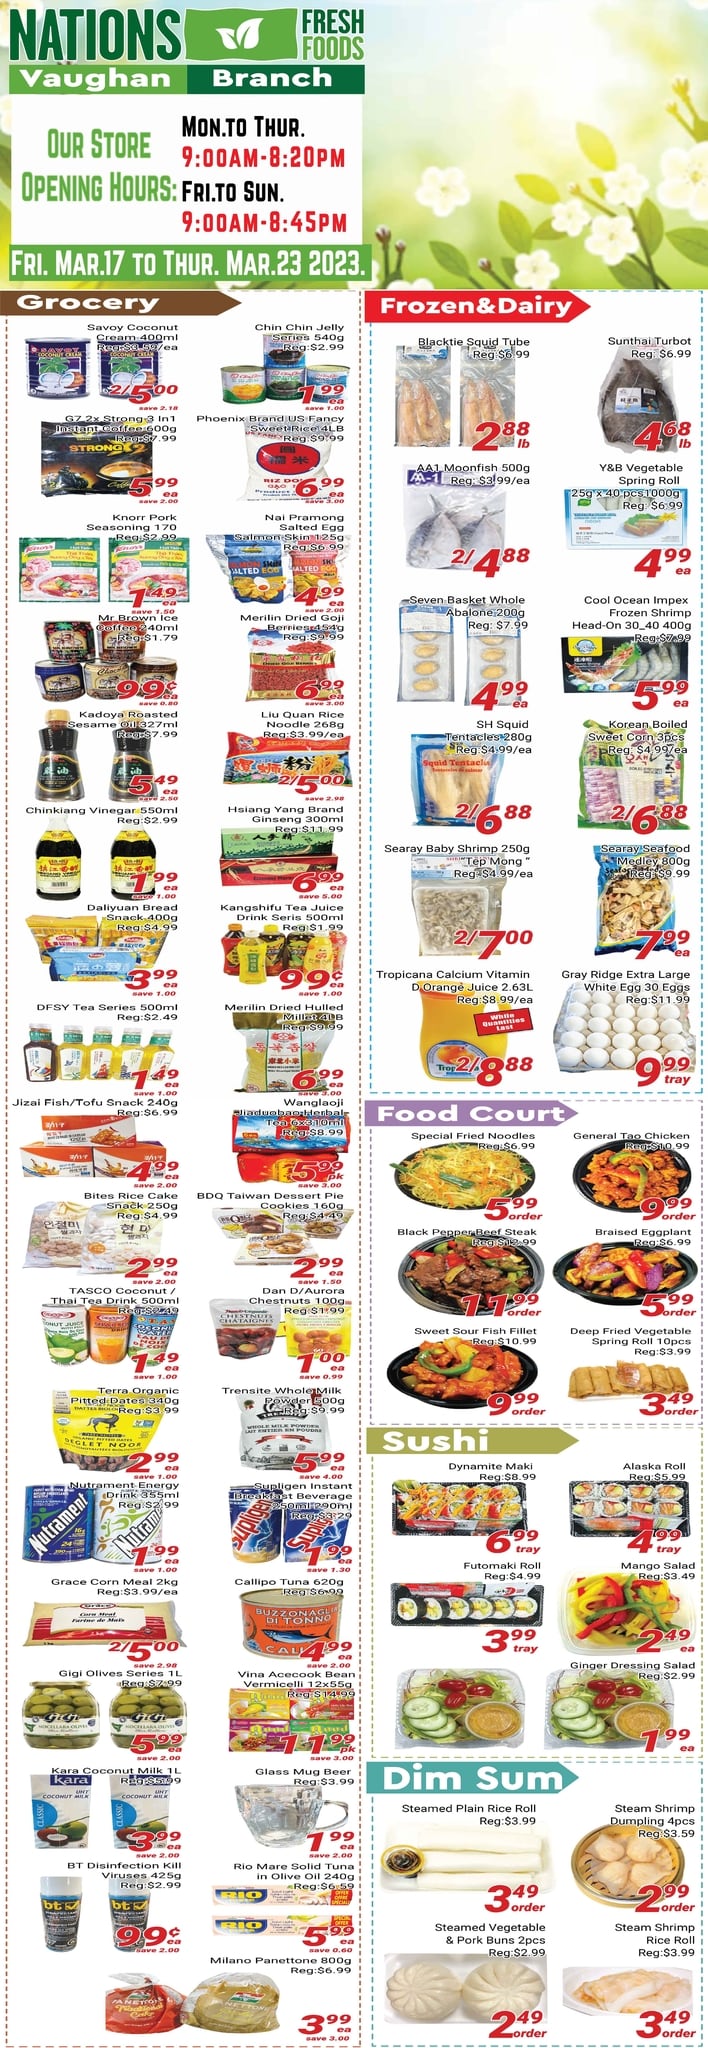 Nations Fresh Foods - Brampton - Weekly Flyer Specials - Page 1